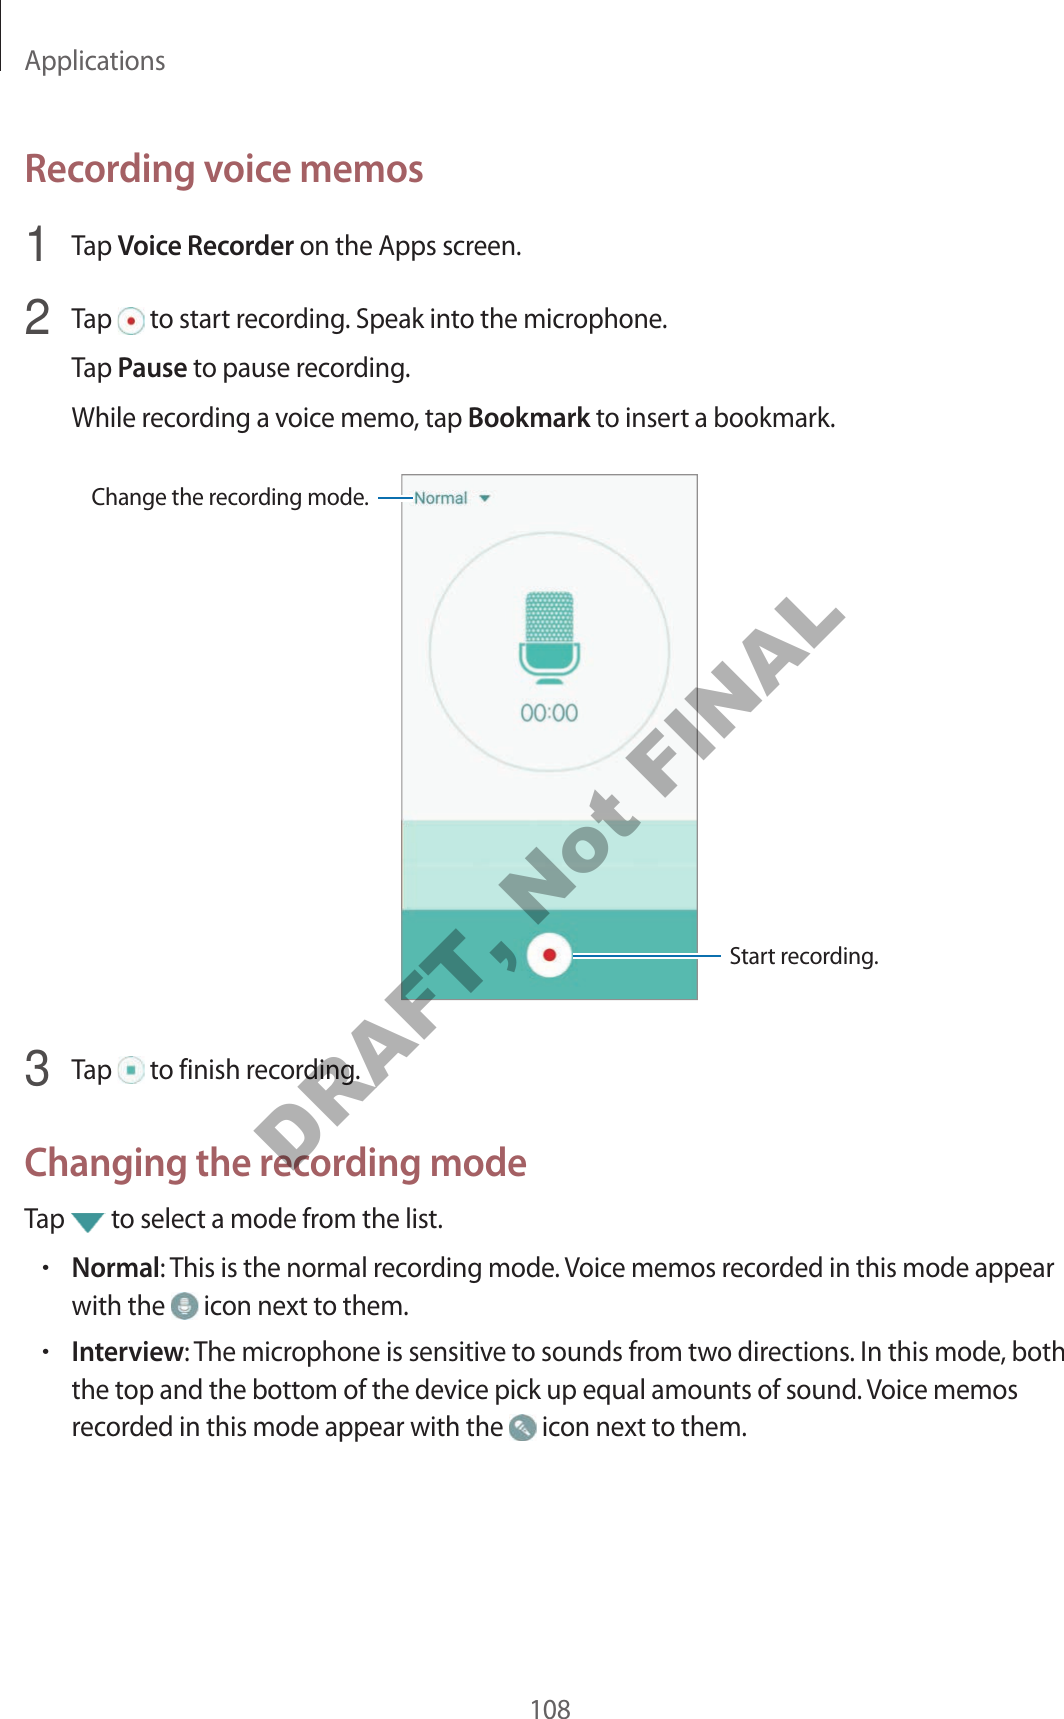 Applications108Recor ding v oic e memos1  Tap Voice Recor der on the Apps screen.2  Tap   to start recor ding . Speak in to the micr ophone .Tap Pause to pause rec or ding .While rec or ding a v oice memo, tap Bookmark to insert a bookmark.Change the recor ding mode .Start rec or ding .3  Tap   to finish recor ding .Changing the r ec or ding modeTap   to select a mode from the list.•Normal: This is the normal rec or ding mode . Voice memos r ecor ded in this mode appear with the   icon next to them.•Interview: The micr ophone is sensitiv e to sounds fr om two dir ections. In this mode, both the top and the bottom of the devic e pick up equal amounts of sound . Voice memos recor ded in this mode appear with the   icon next to them.DRAFT, Not FINAL